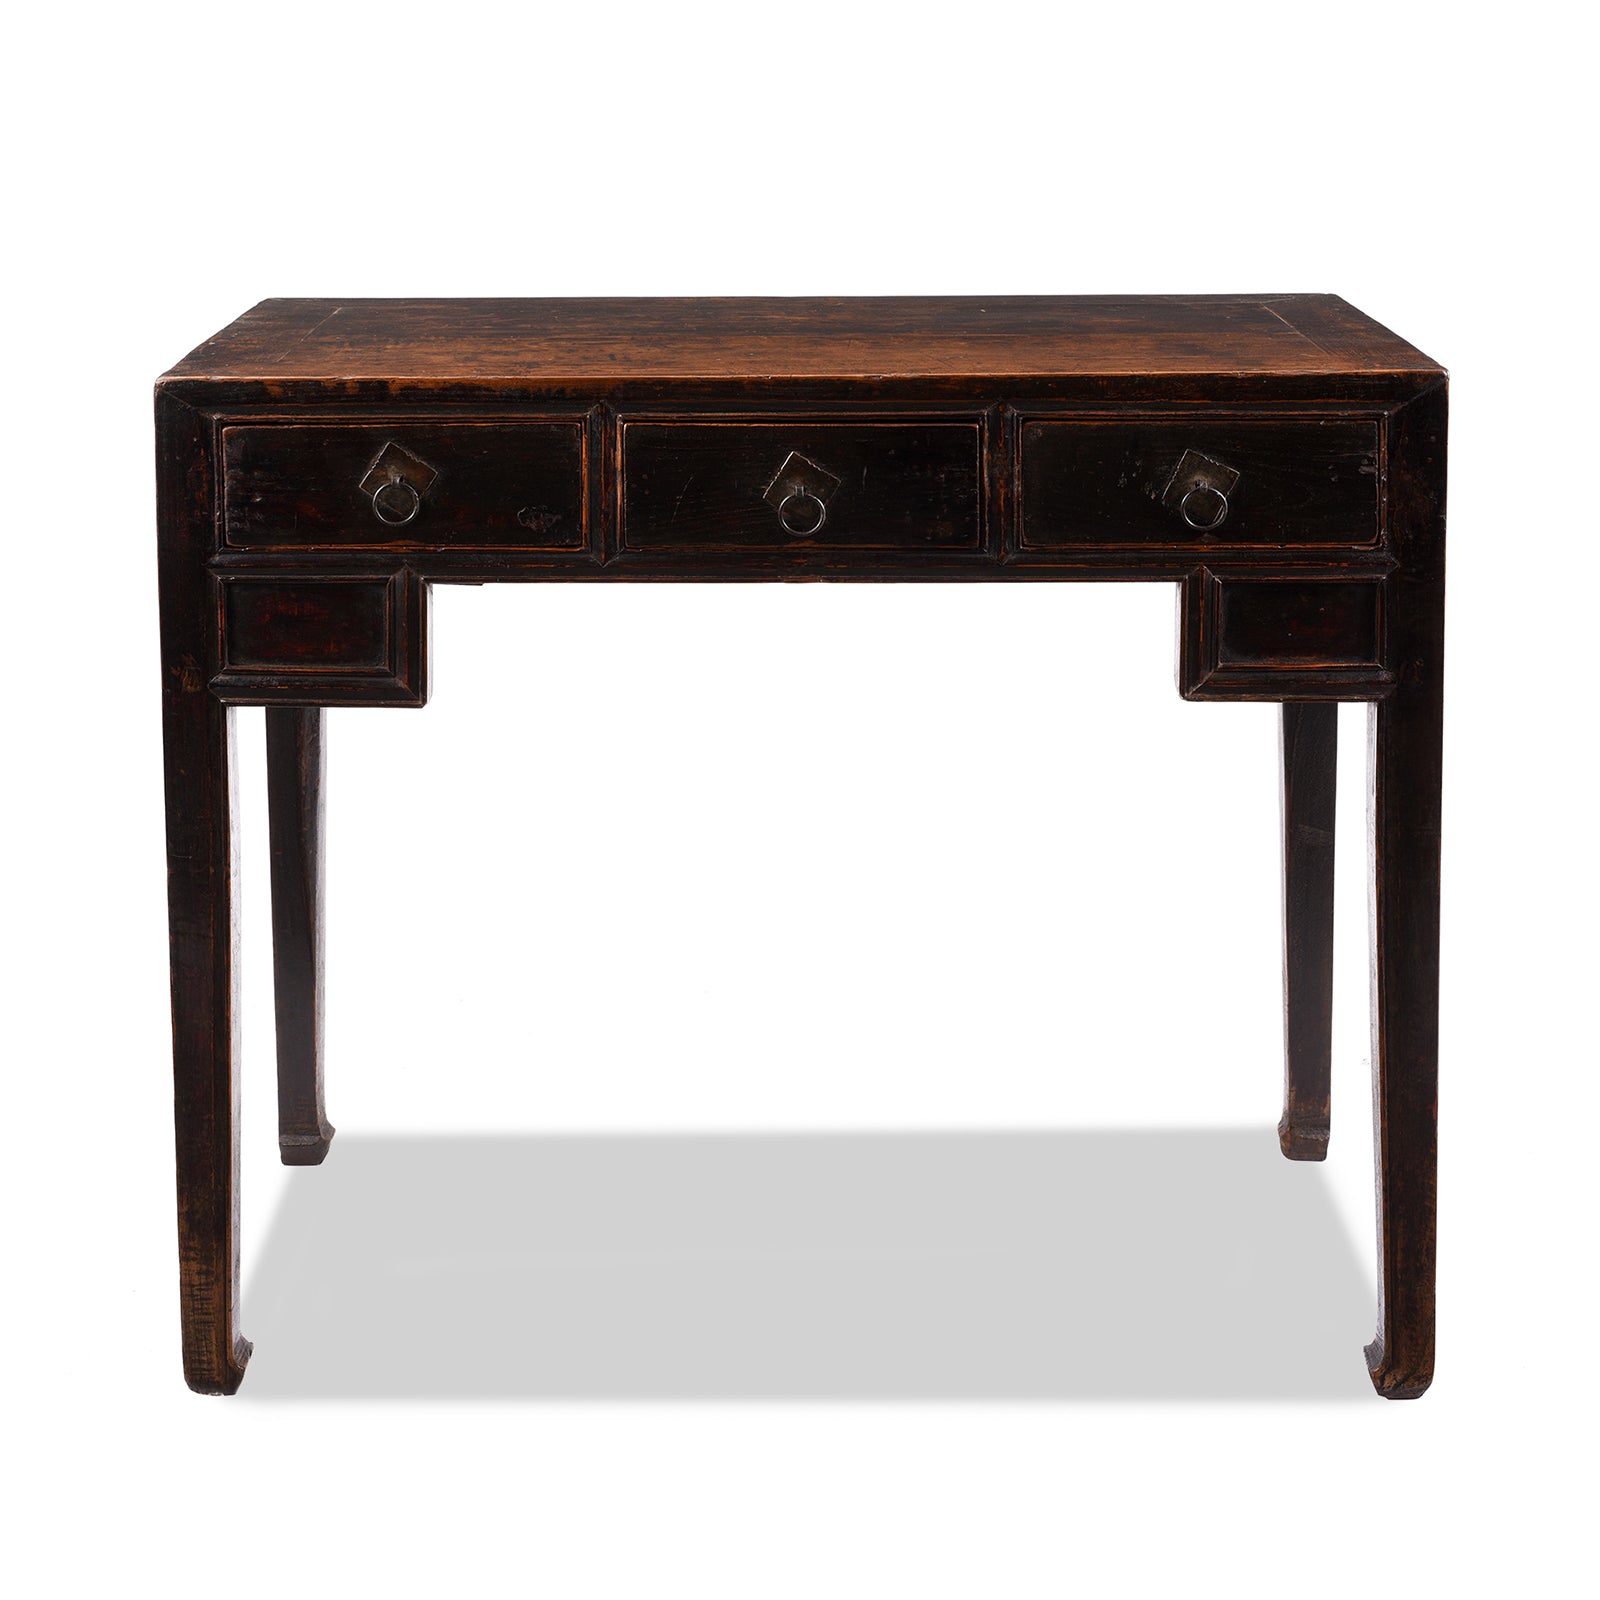 Antique Black 3 Drawer Console Table From Shanxi  | Indigo Antiques